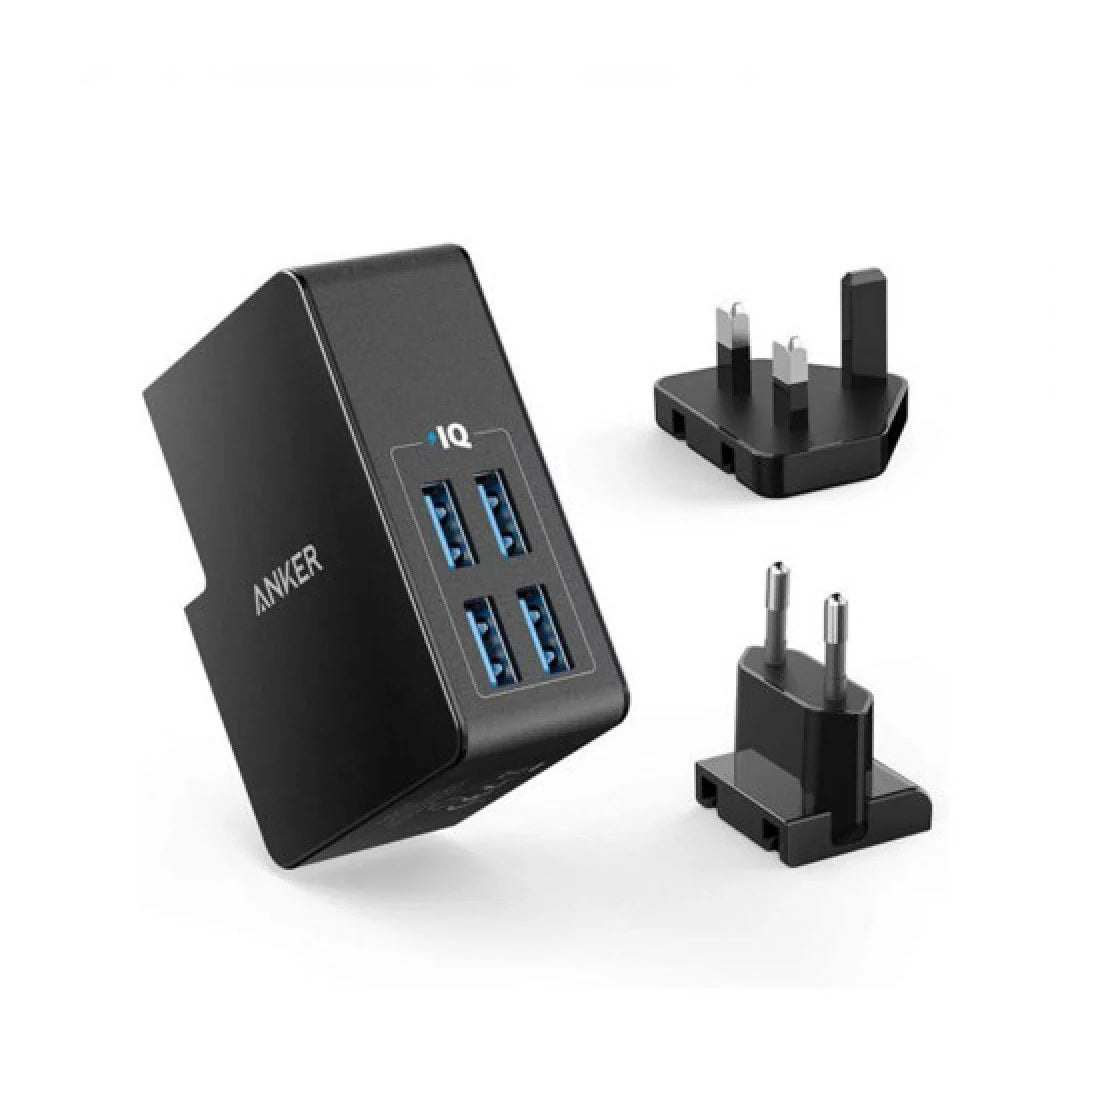 ANKER POWERPORT 4 LITE WALL CHARGER - BLACK